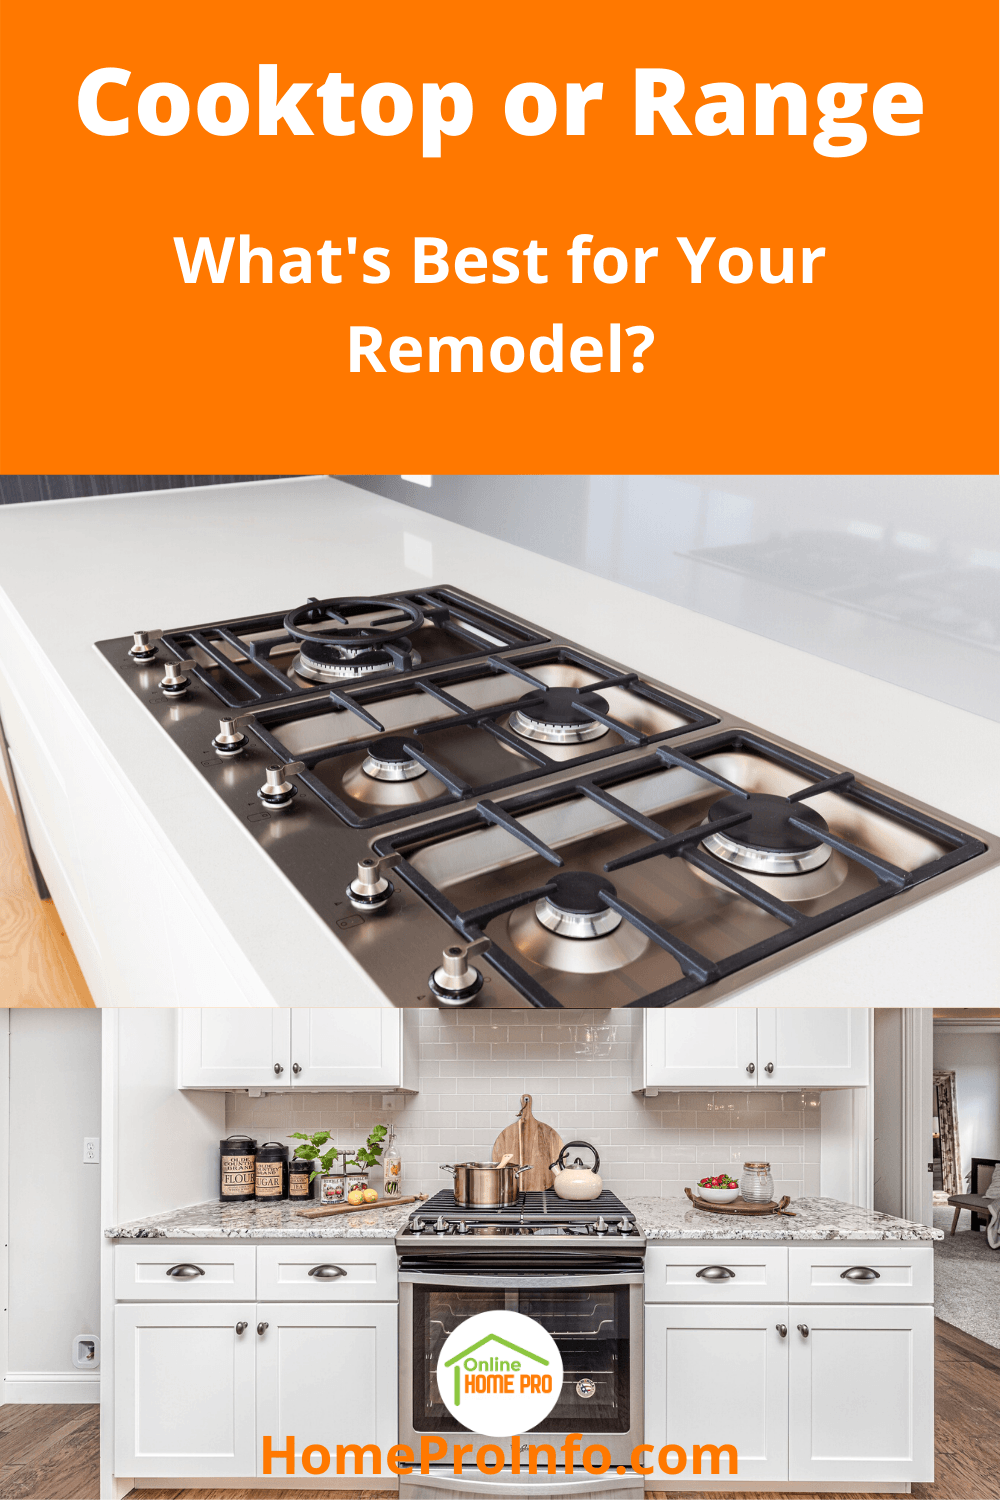 cooktop or range for a remodel